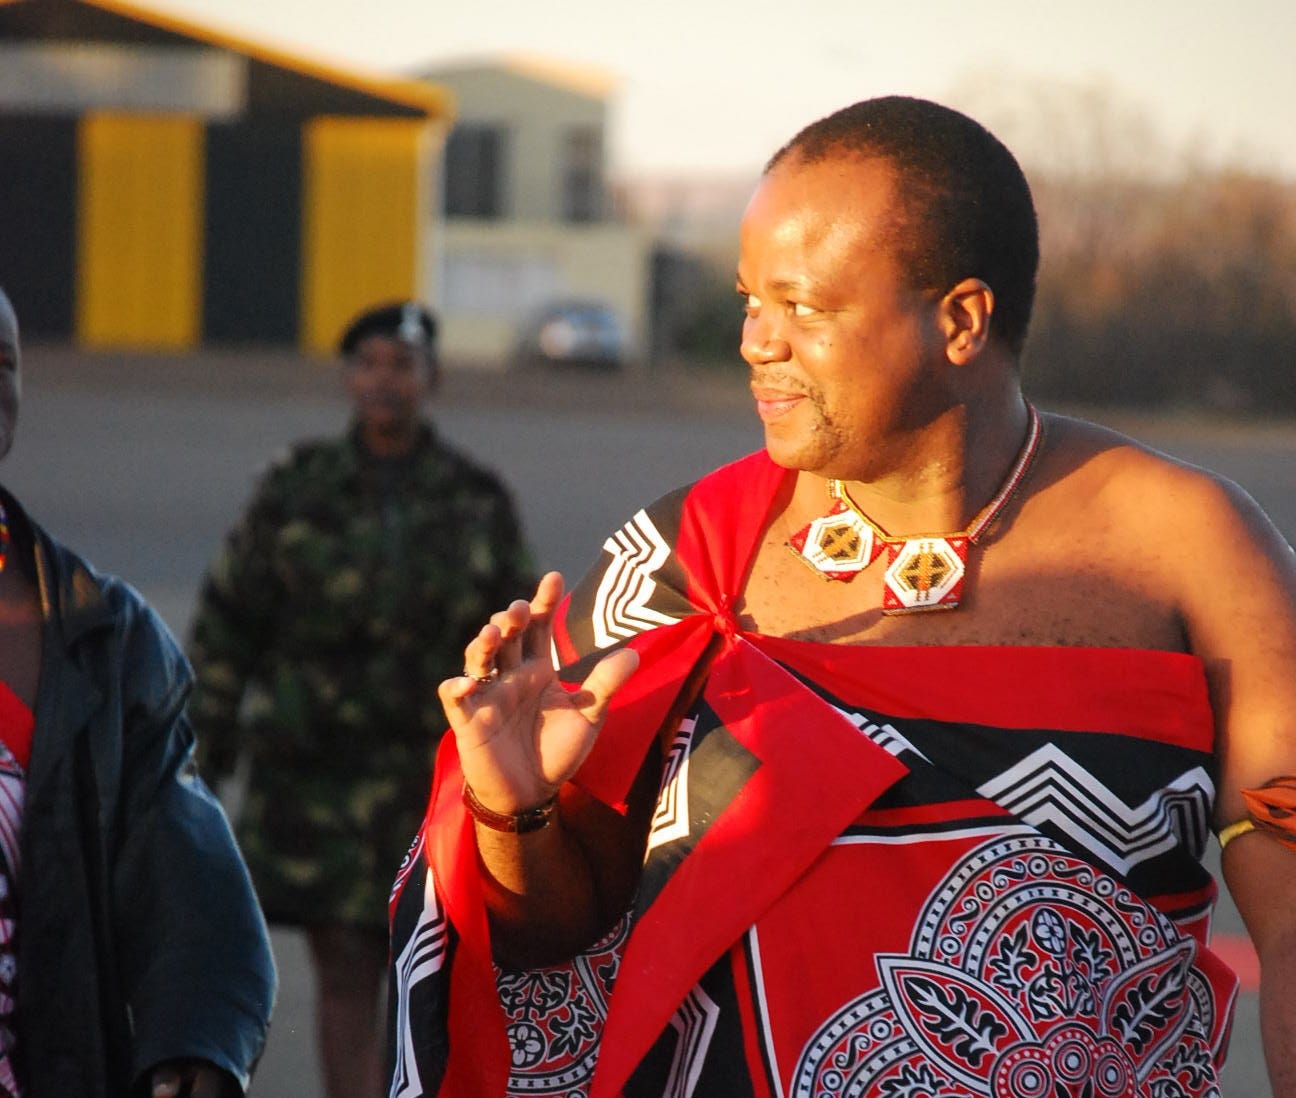 "File:Mswati III King of Eswatini.jpg" by Kollmeierf is licensed under CC BY-SA 3.0. Image shows the King in traditional dress and accompanied by a member of the armed forces in uniform in the background. The King is a middle-aged Black man with short cropped hair and a slight amount of facial hair. He is smiling and standing in sunlight from a setting sun.